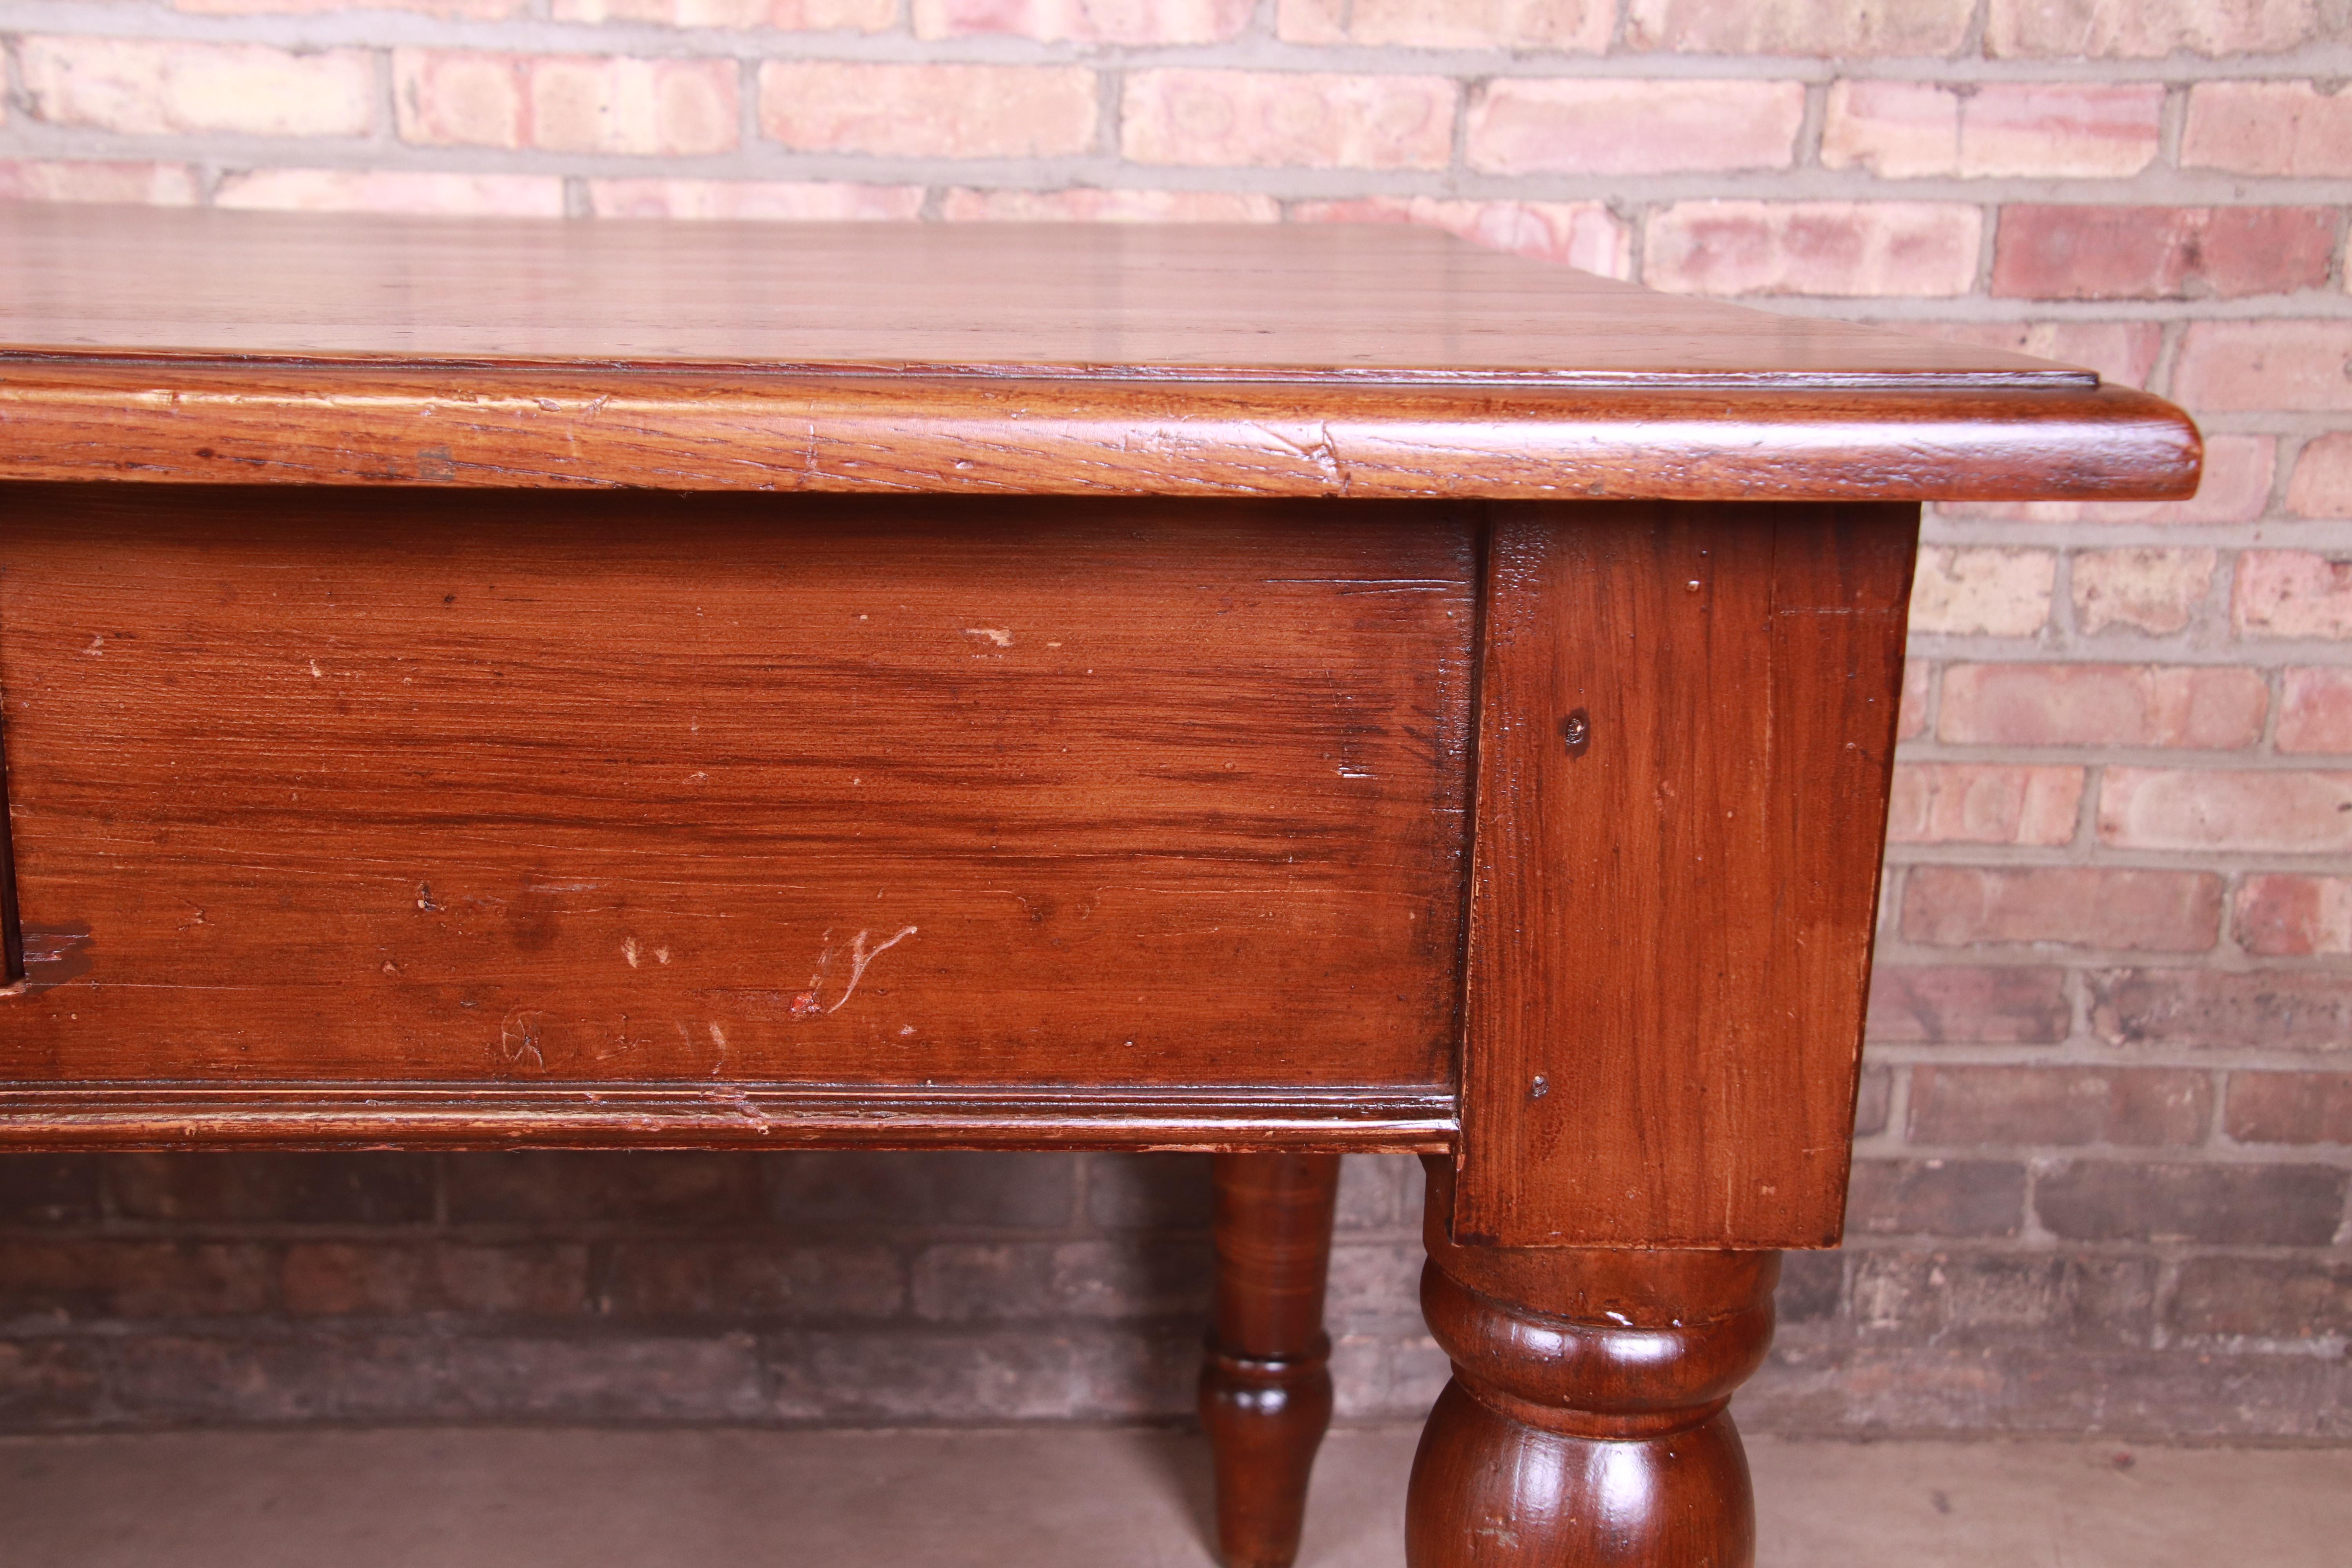 Antique French Provincial Elm Wood Harvest Farm Table With Drawers, Circa 1900 For Sale 4